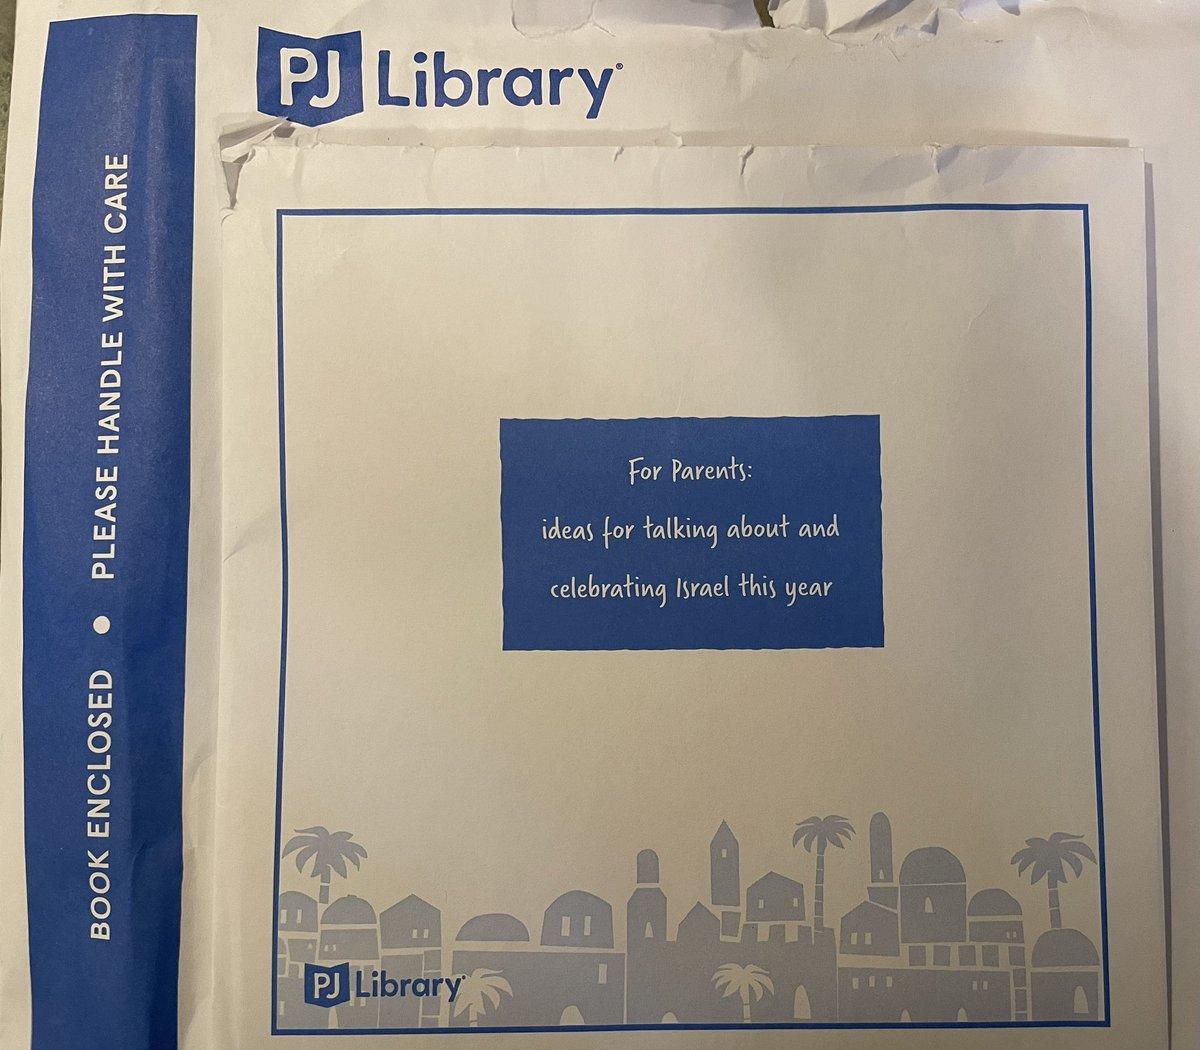 The first item in this booklet, which we did open upon receiving it today, was … to make falafel. At this point we’ll probably need to recycle PJ Library materials without looking.